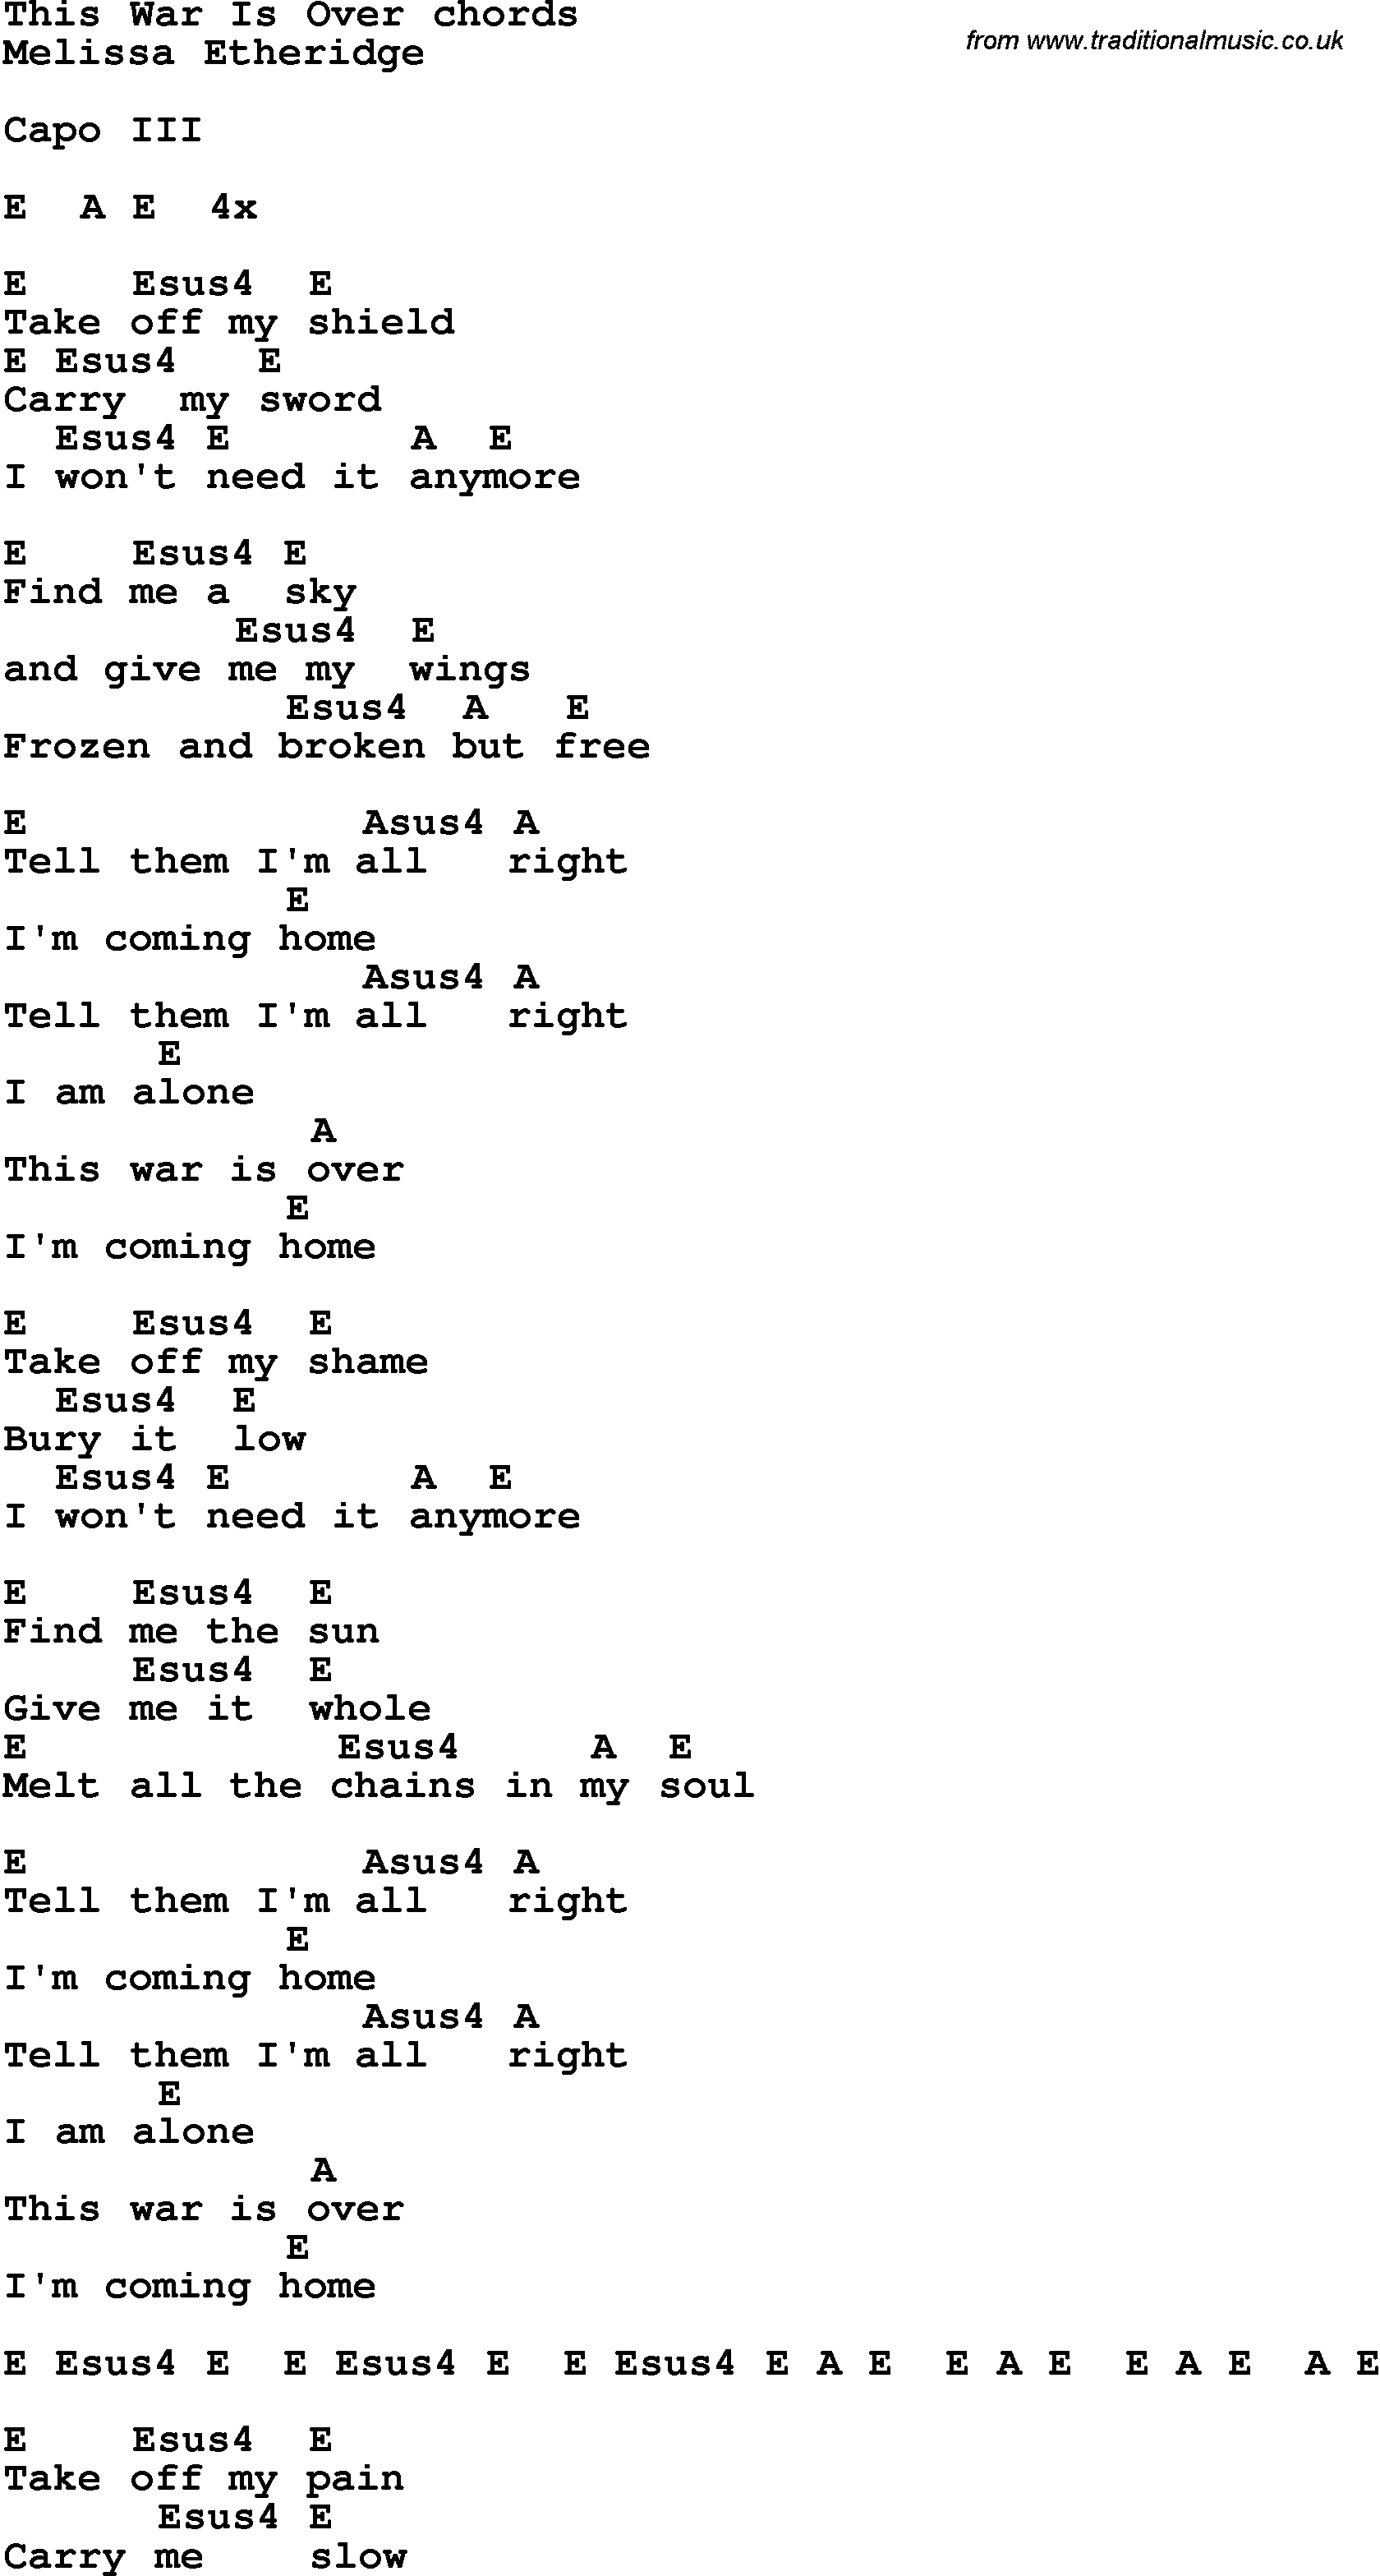 Song Lyrics with guitar chords for This War Is Over